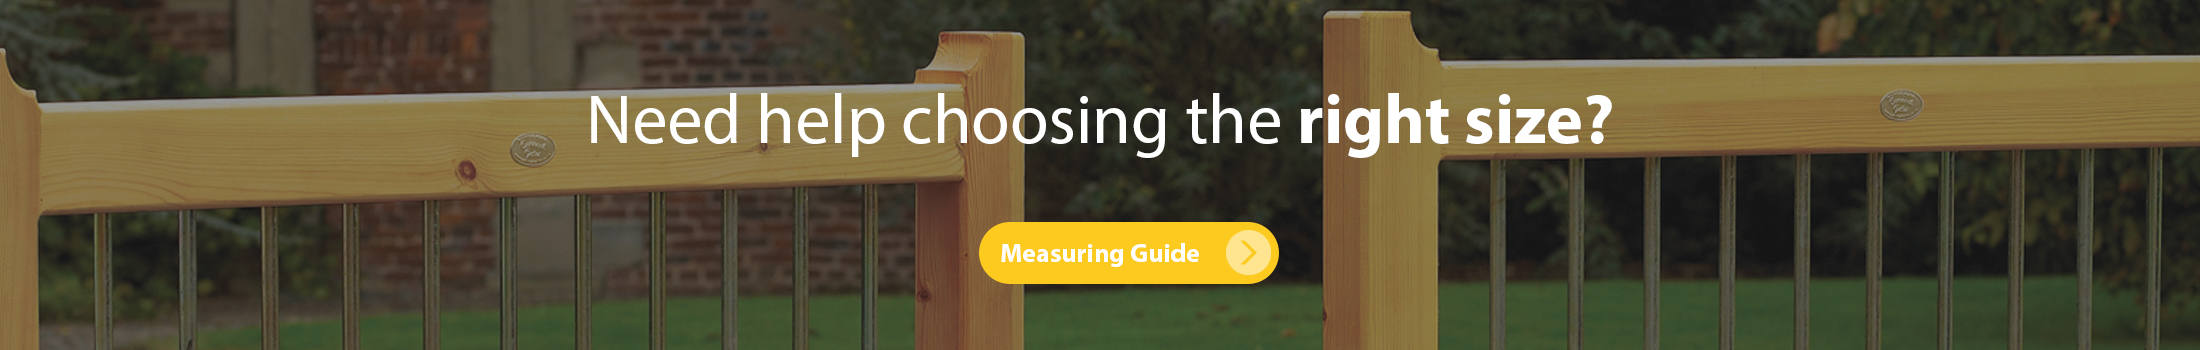 View the measuring guide for more information